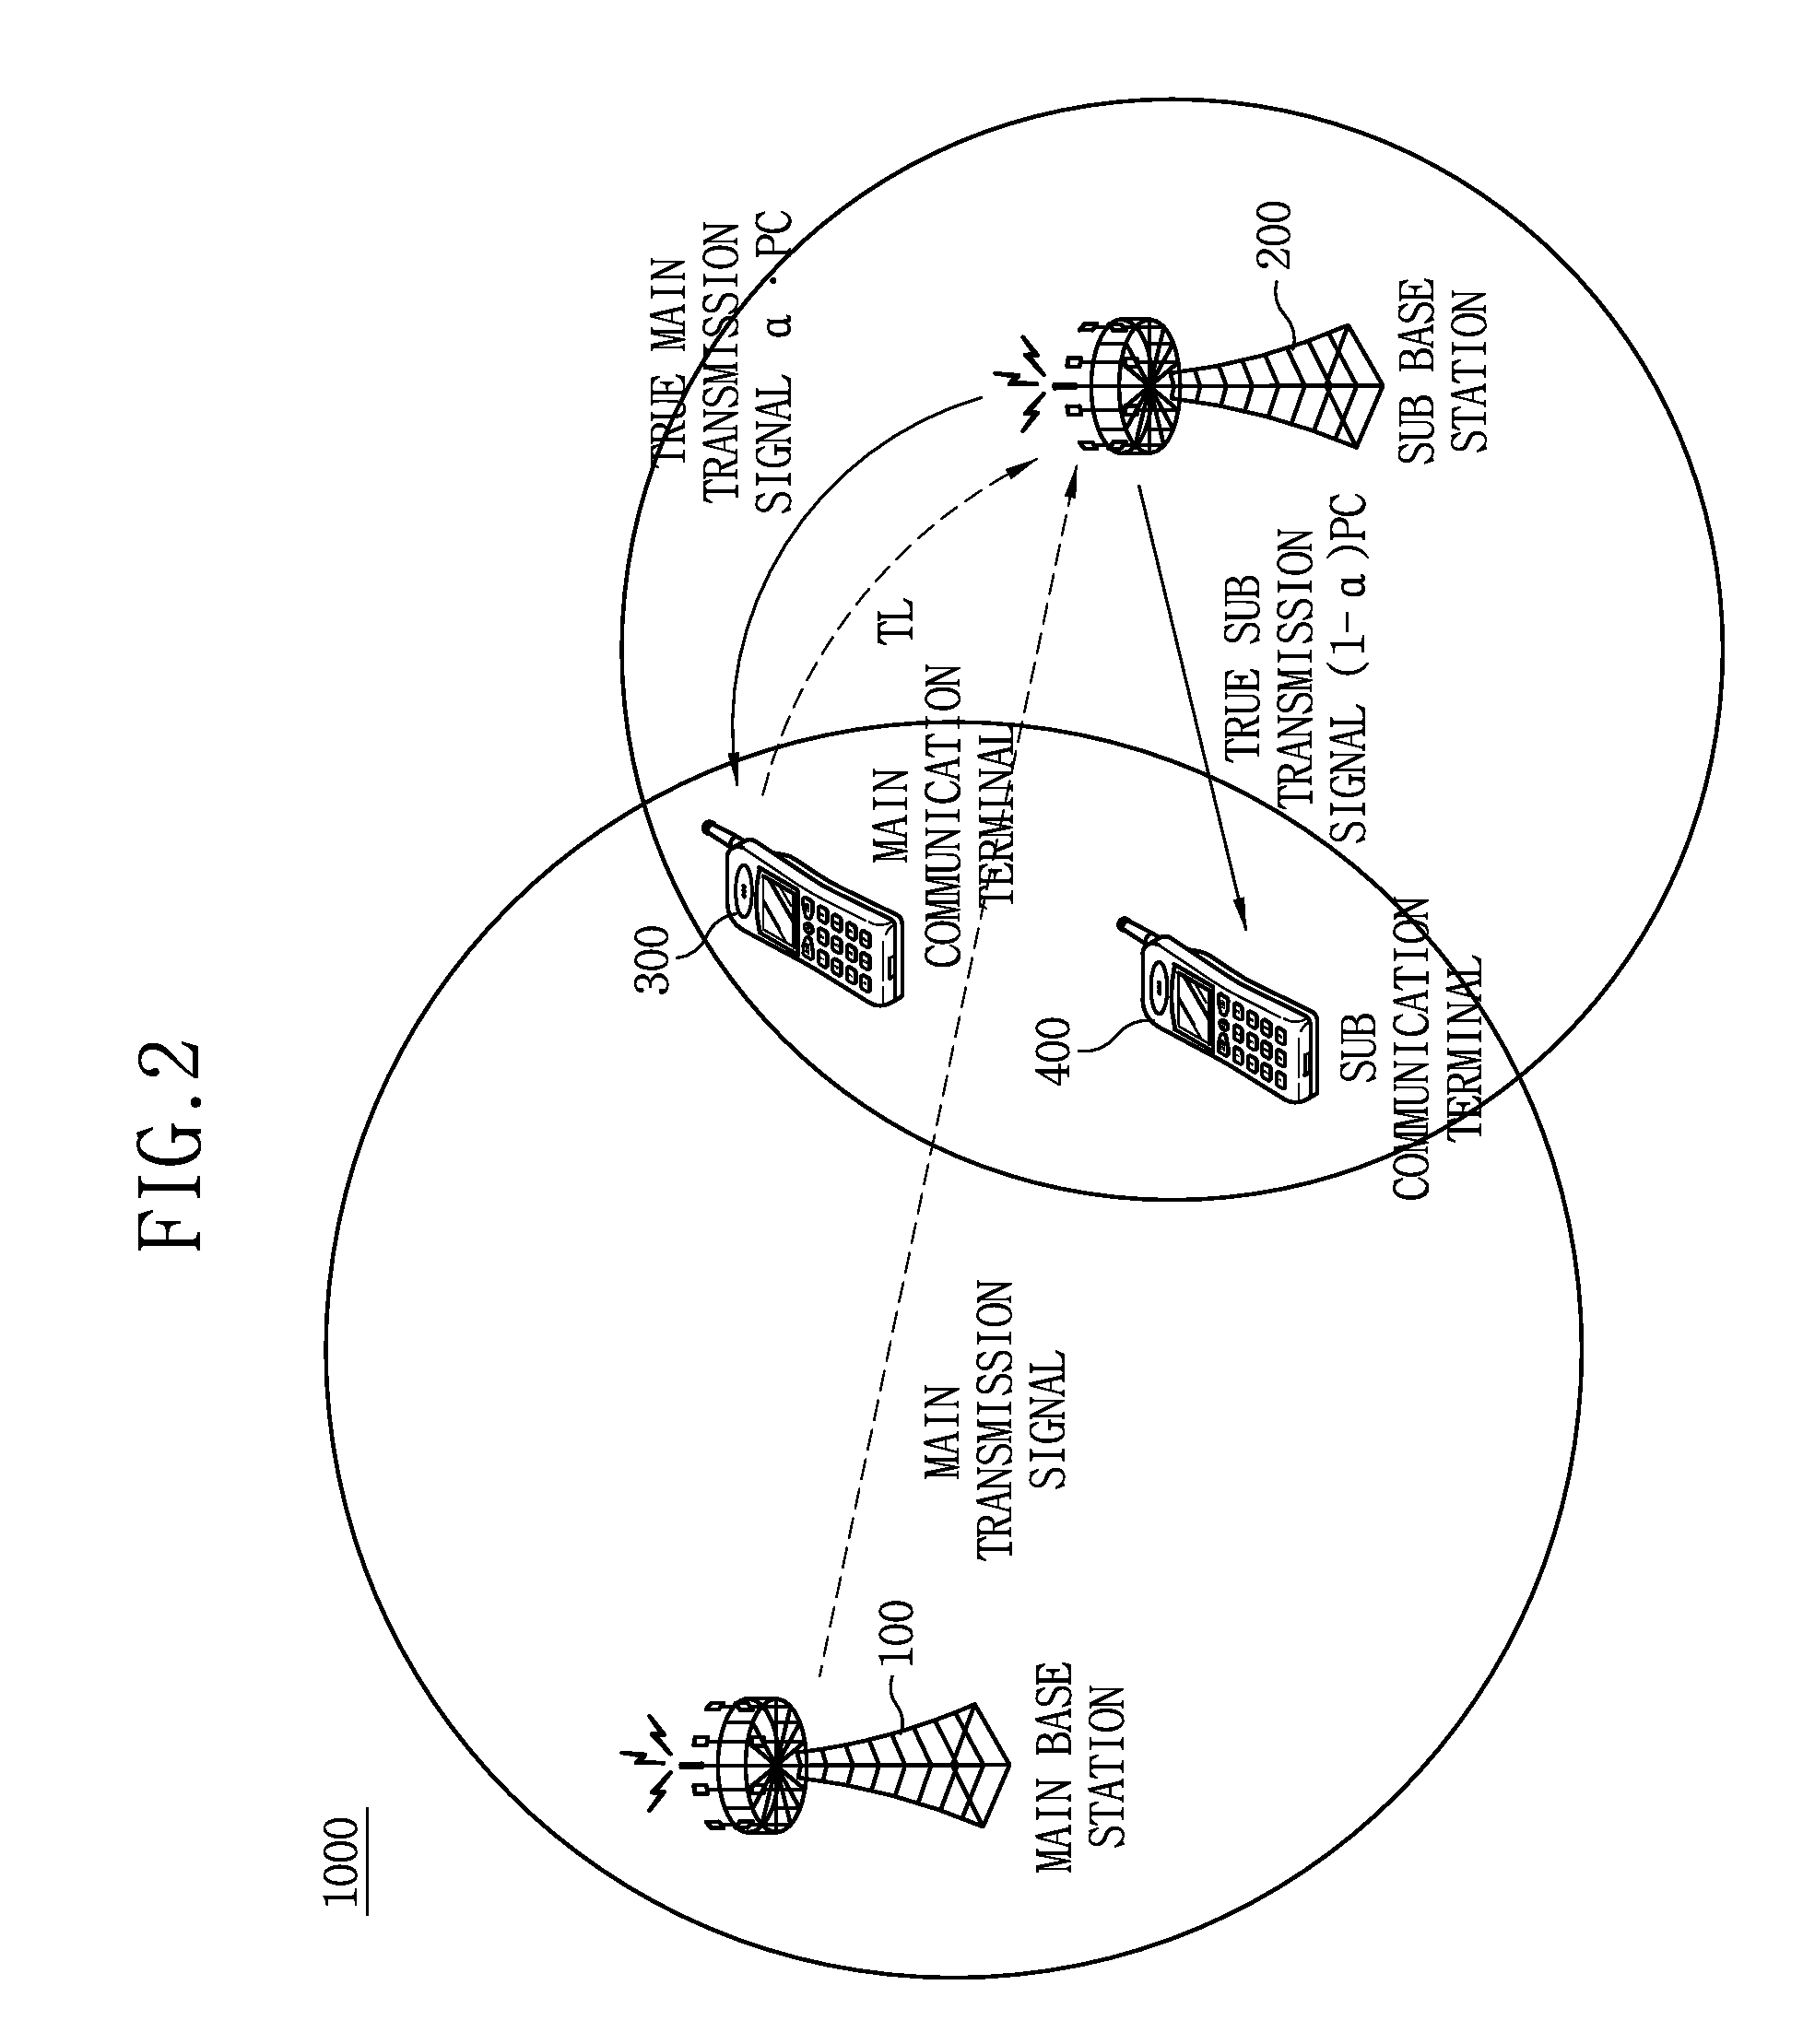 Multi-coexistence communication system based on interference-aware environment and method for operating the same